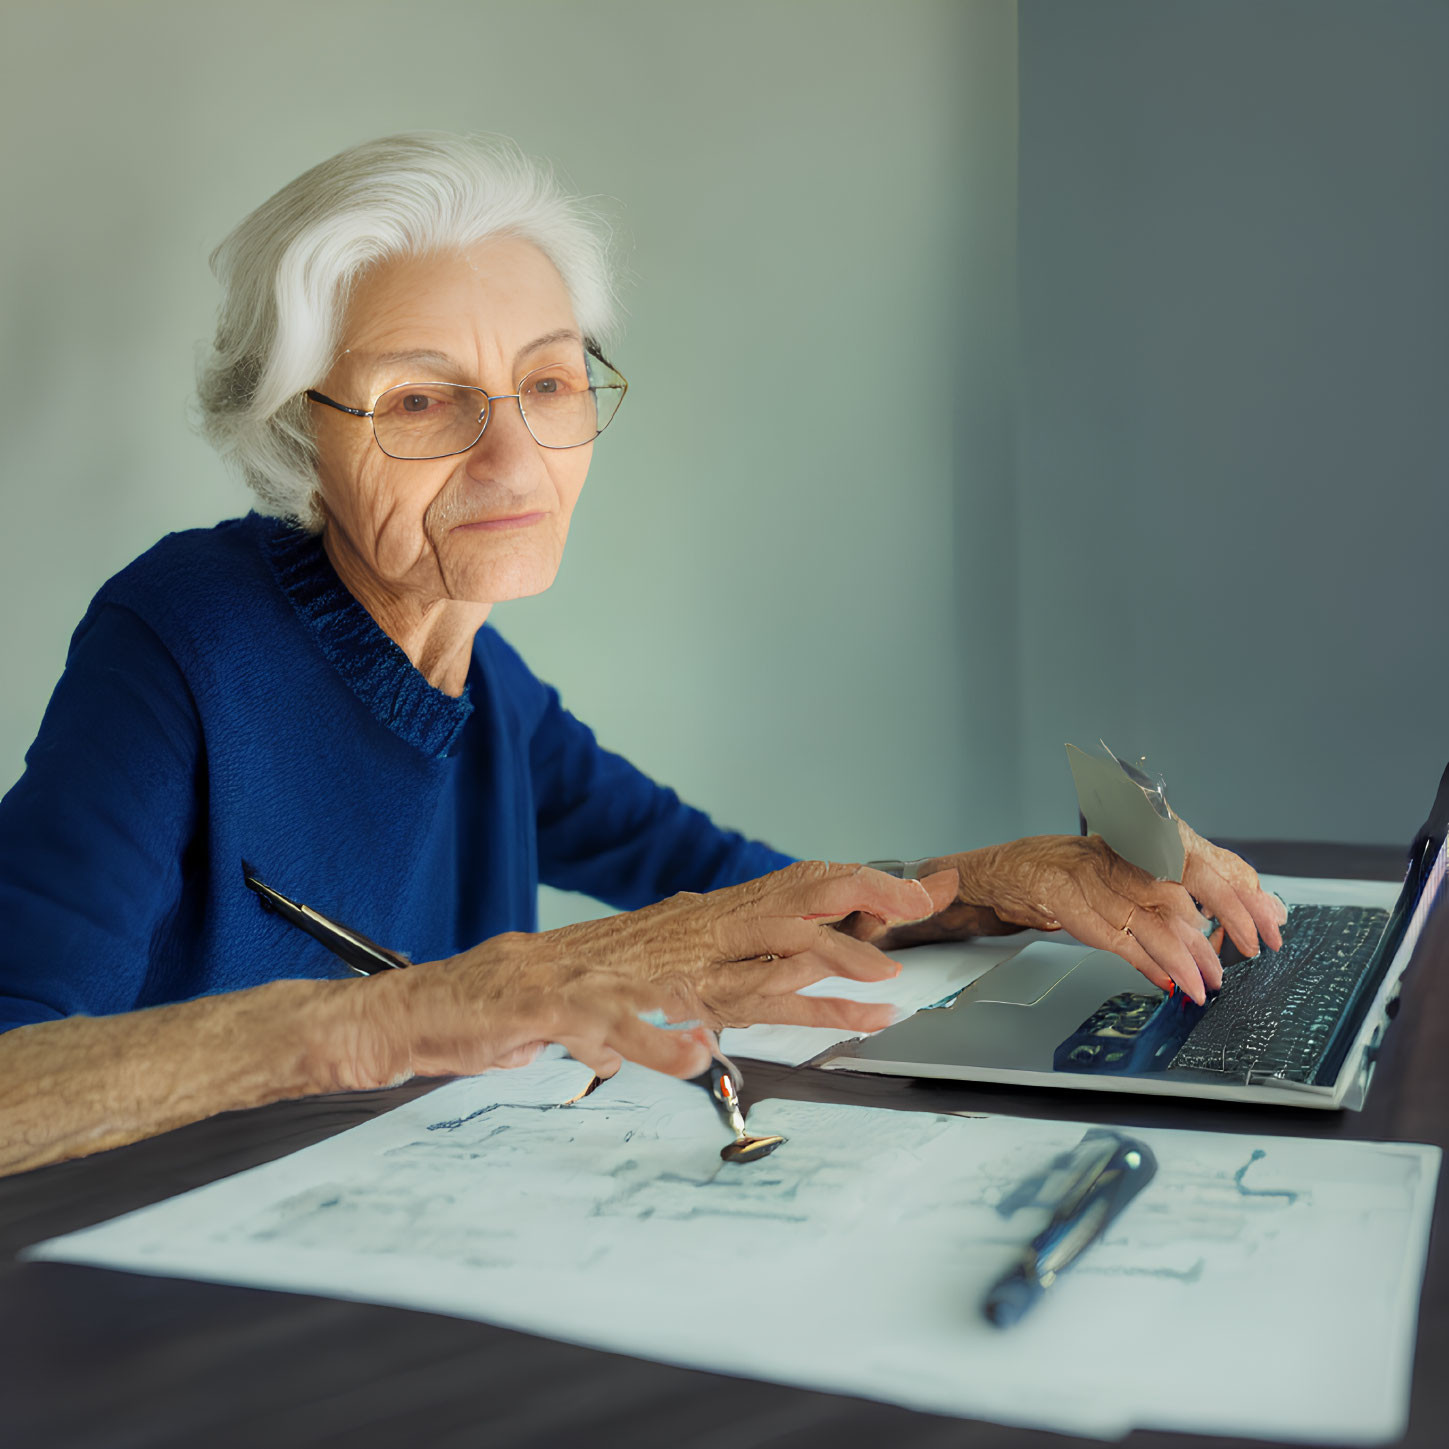 Elderly Woman with Glasses Reviewing Documents on Laptop